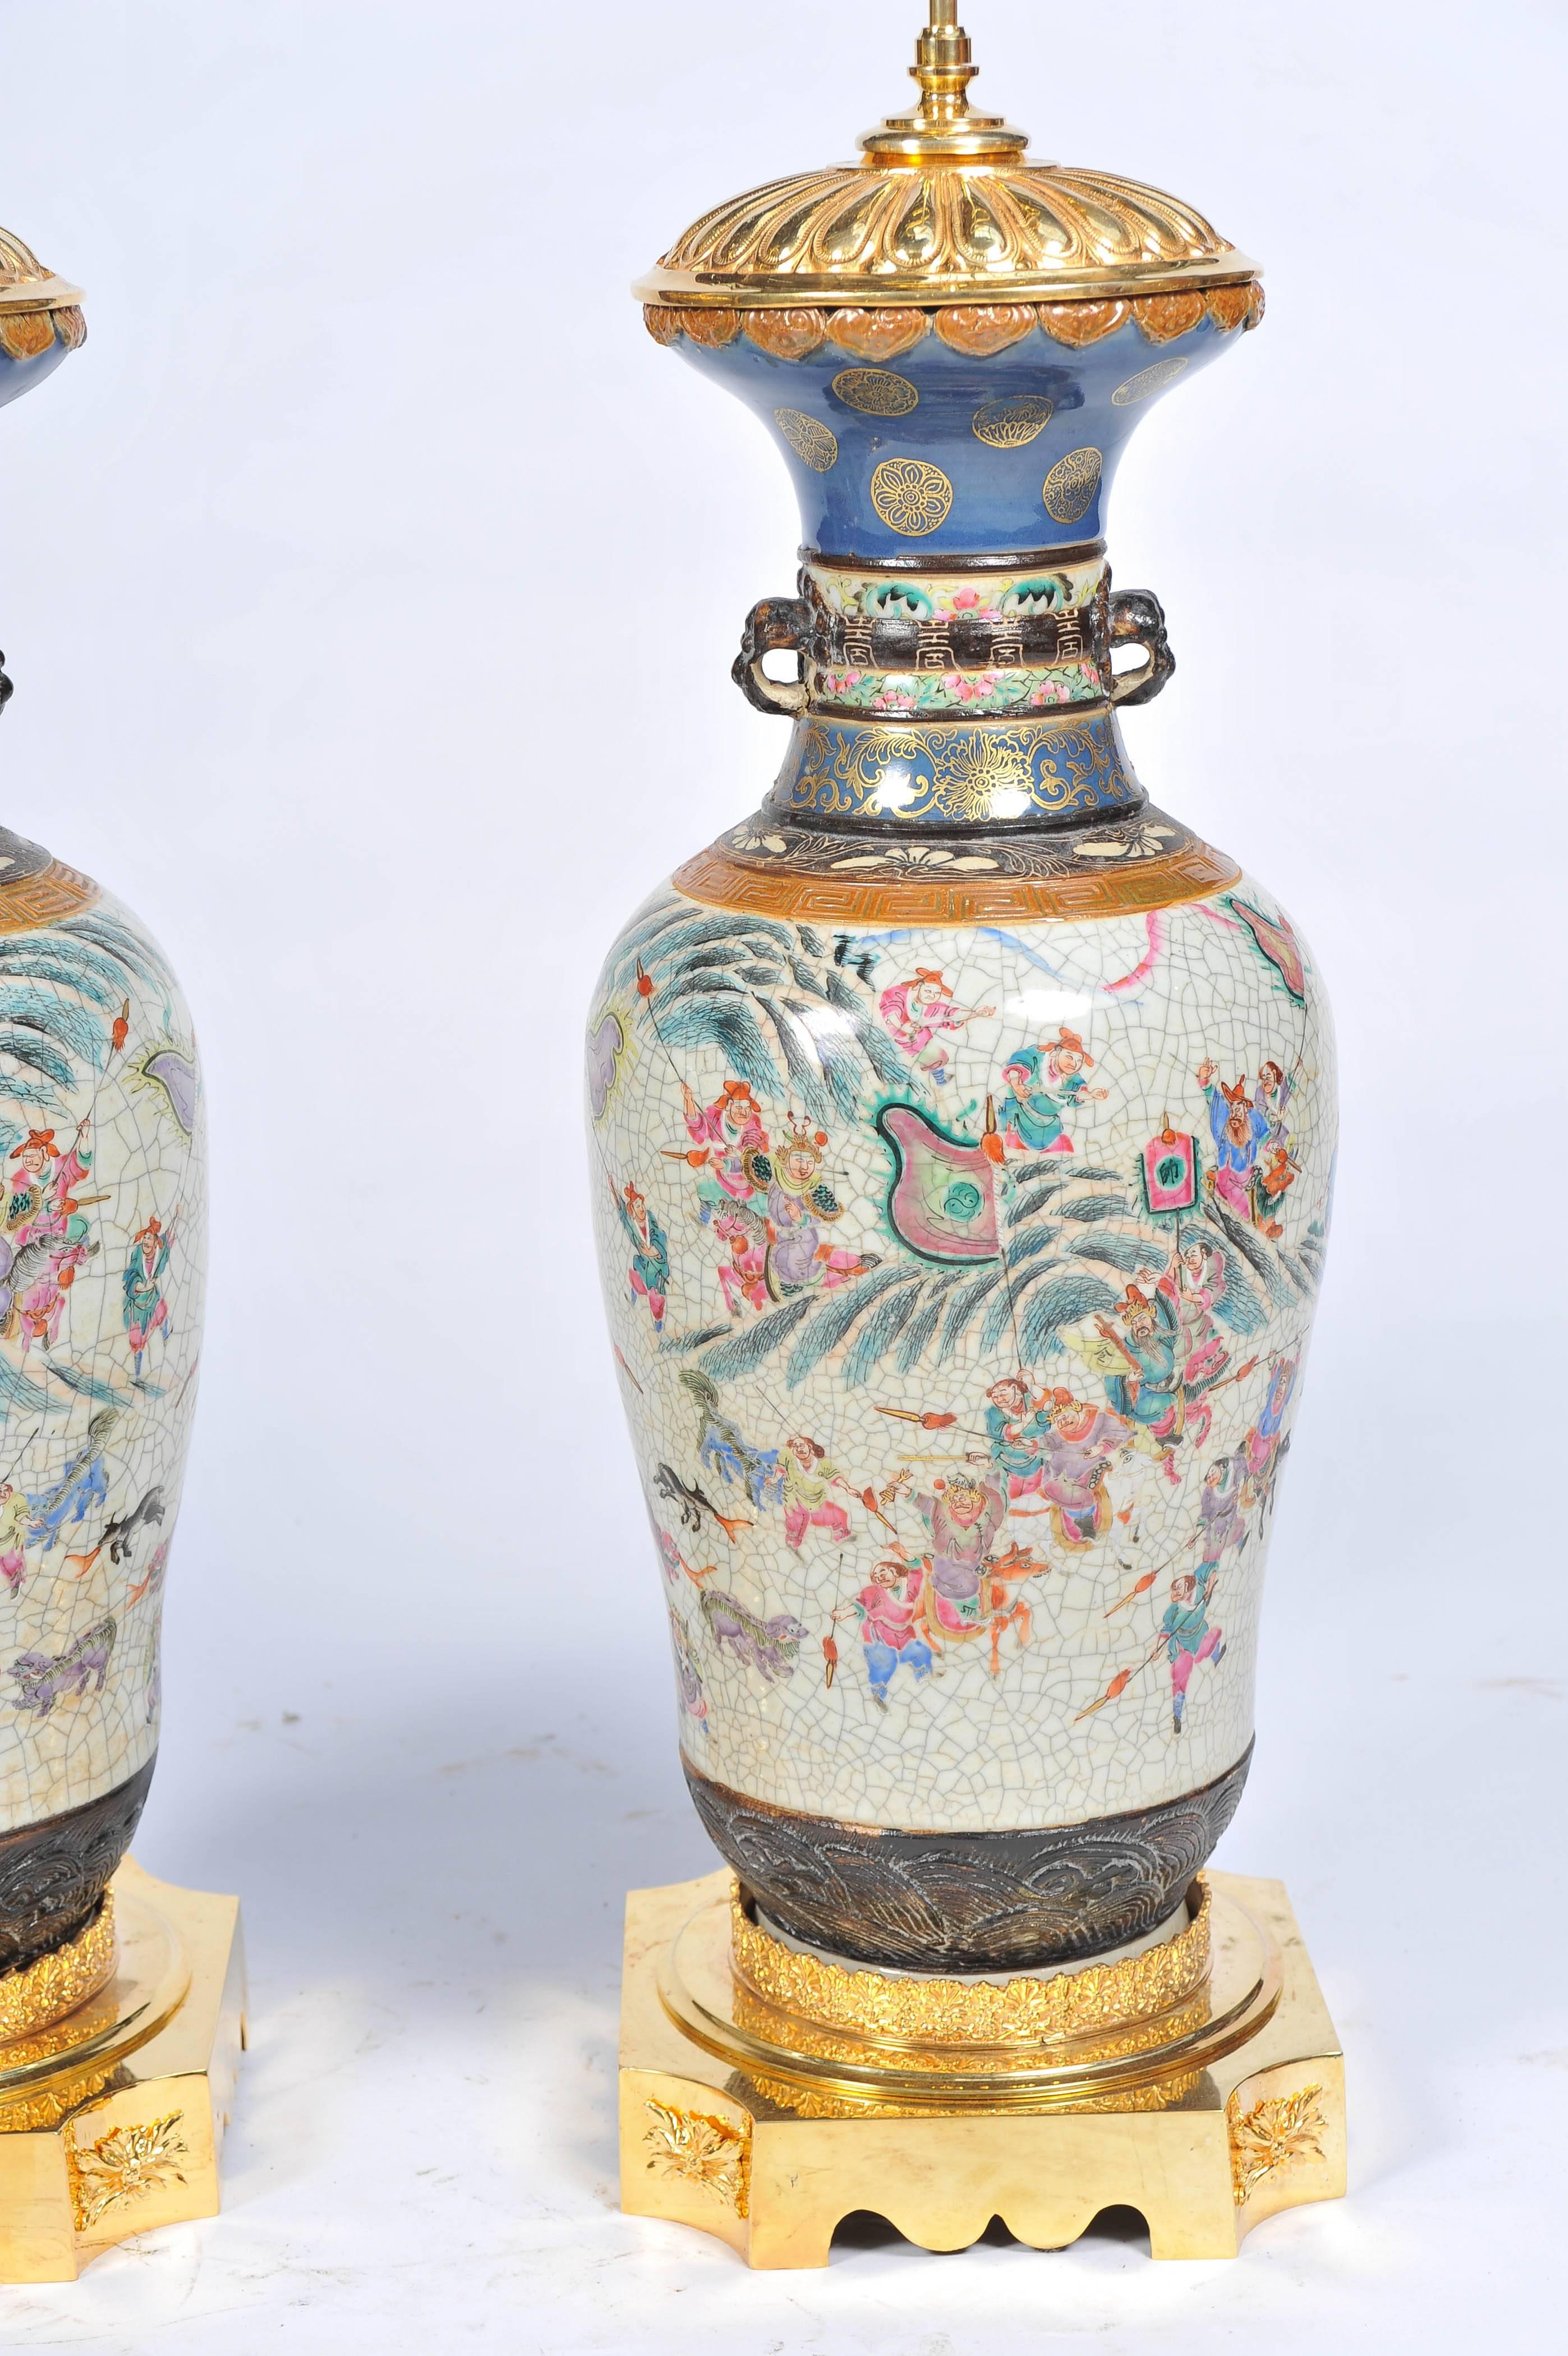 A very impressive pair of 19th century Chinese crackleware famille rose vases or lamps. Having wonderful hand-painted scenes depicting warriors fighting some on horse back, waving flags. Mounted on gilded ormolu bases and tops.